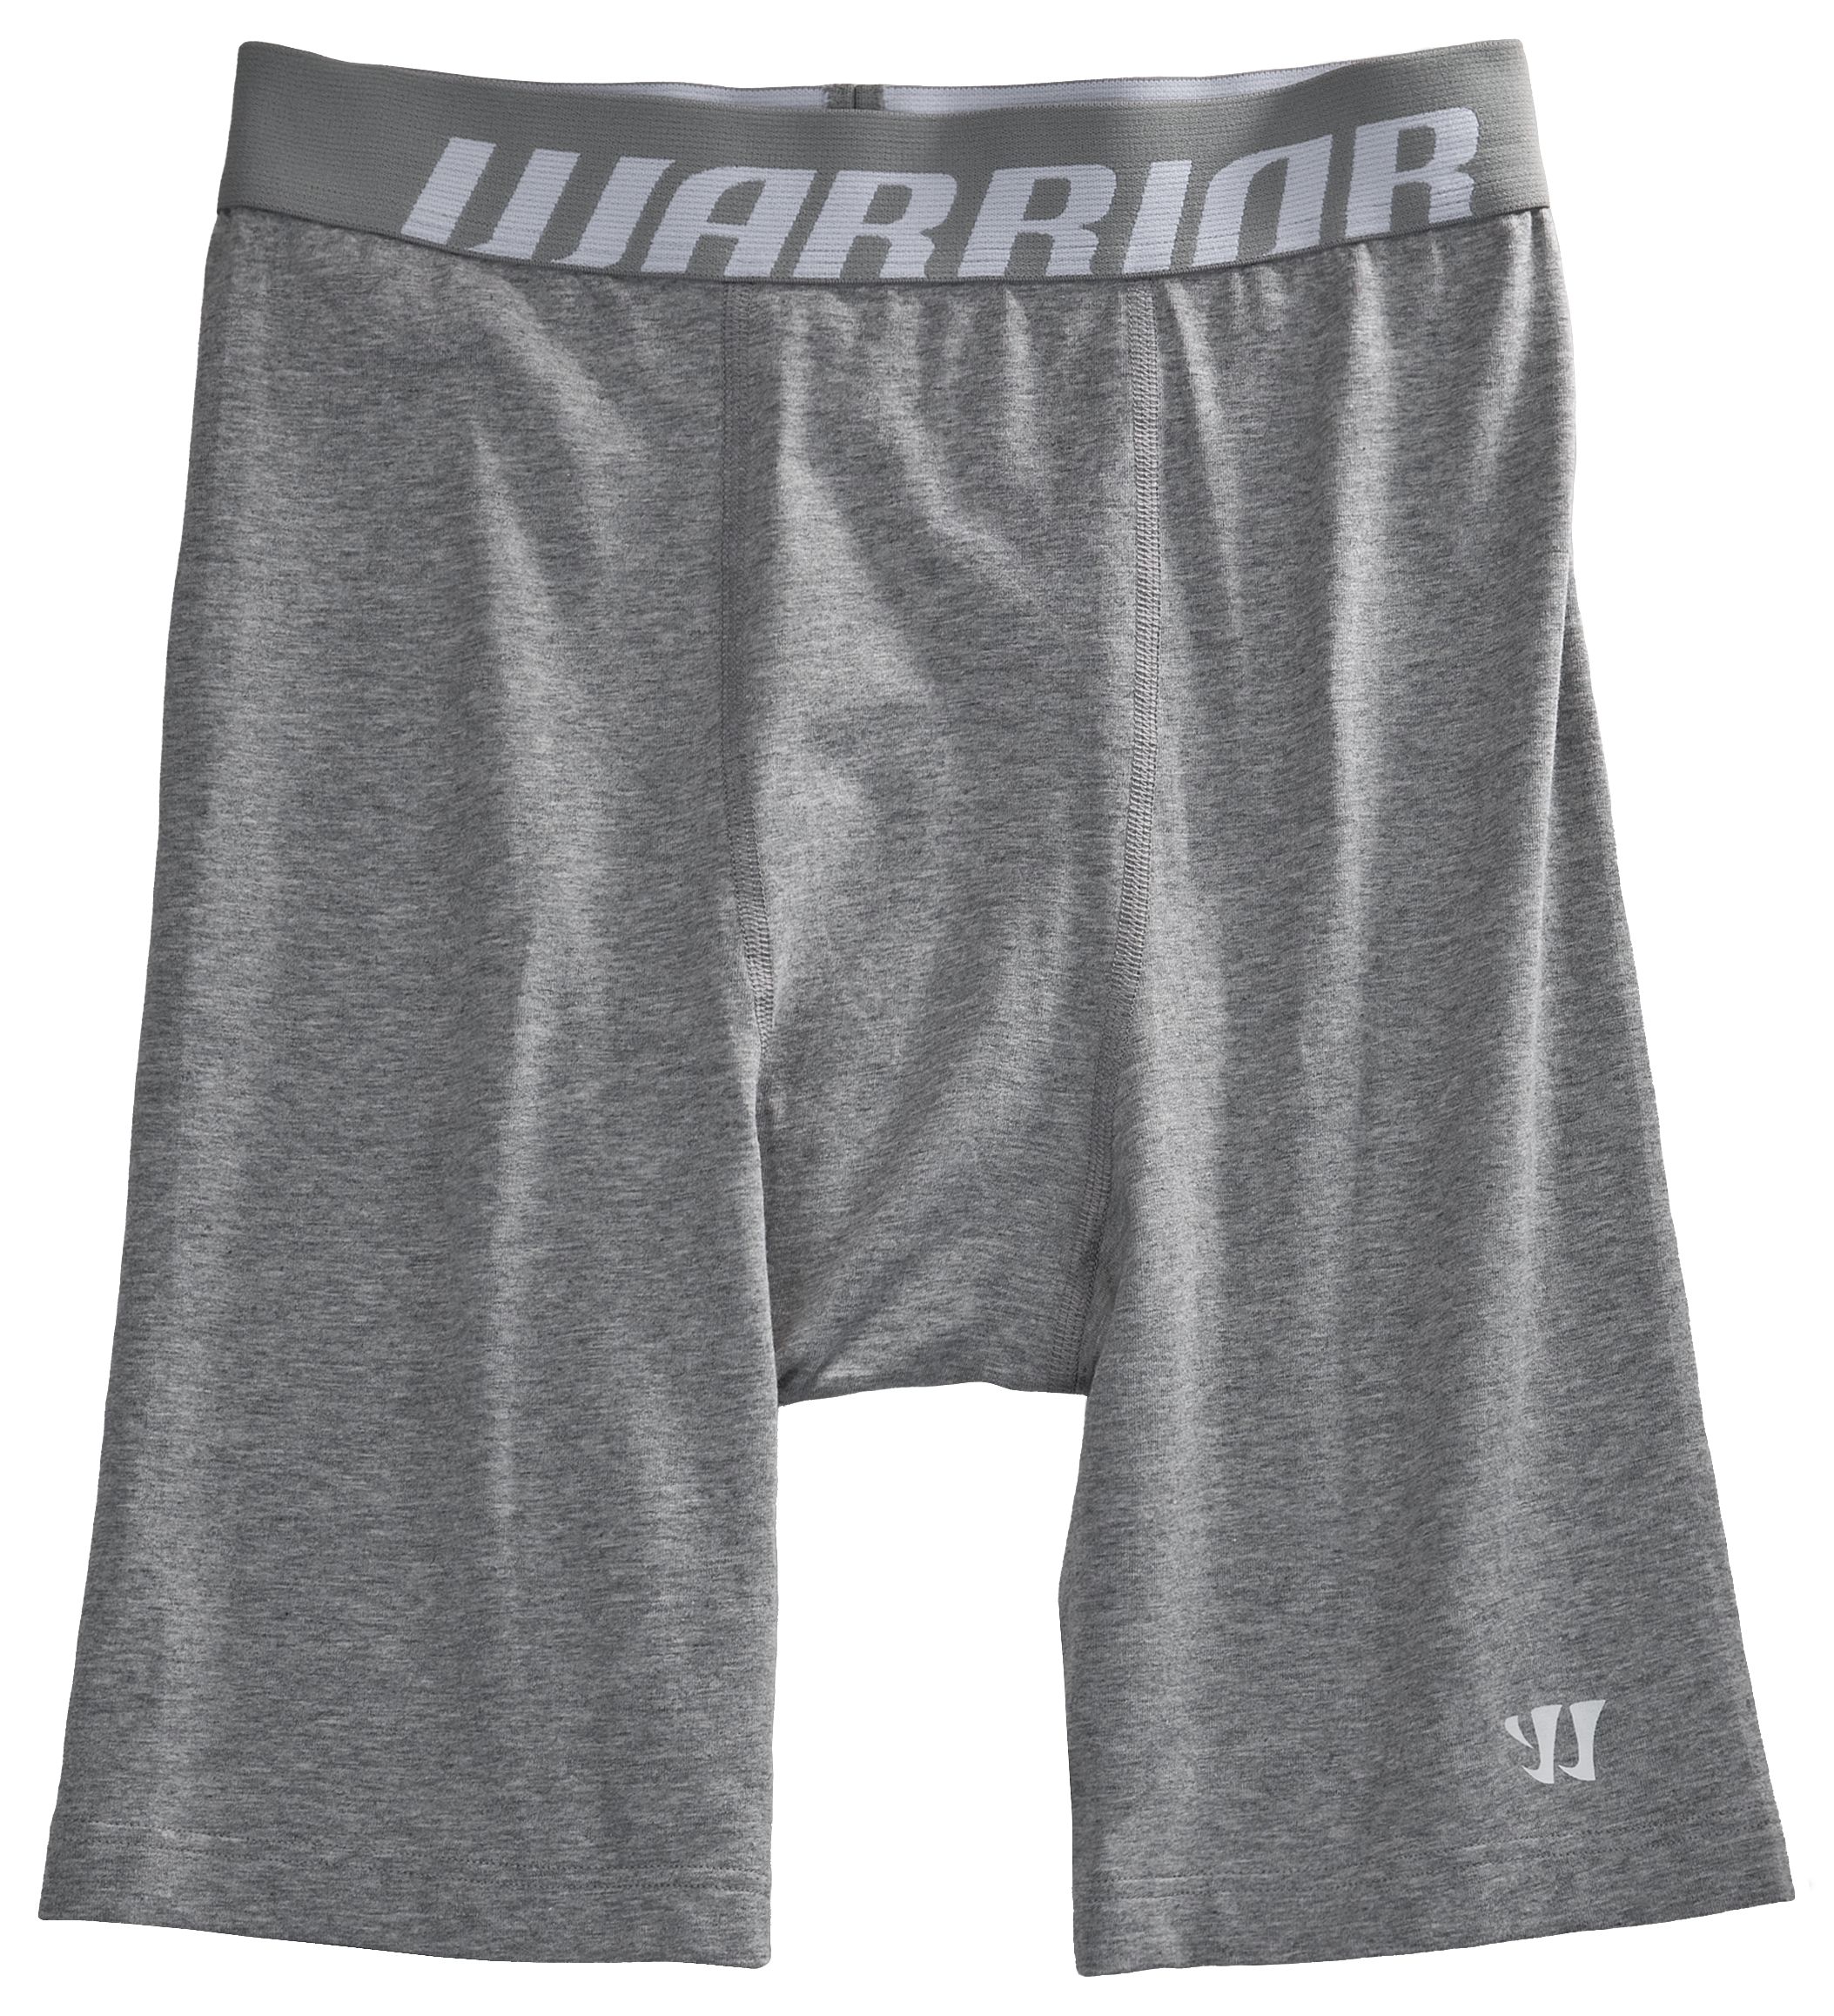 Performance Cotton Compression Short, Heather Grey image number 0